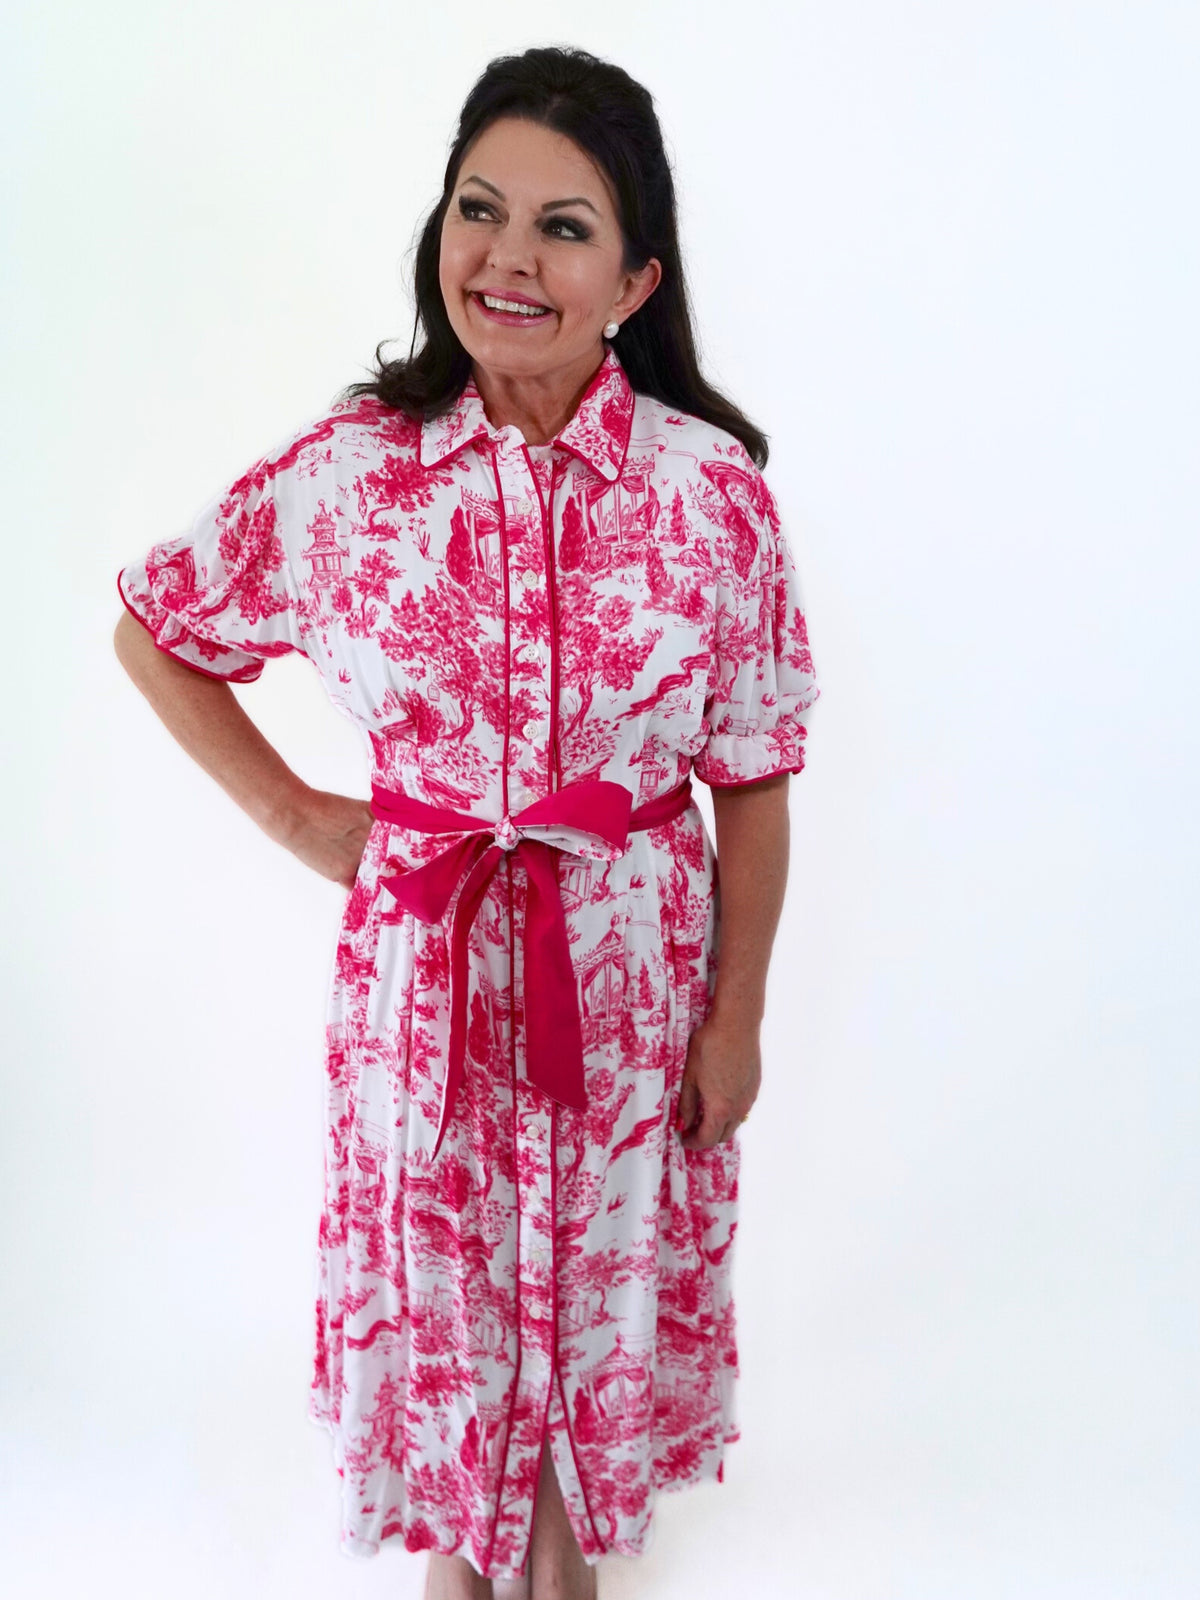 THE CAROL DRESS IN PINK TOILE